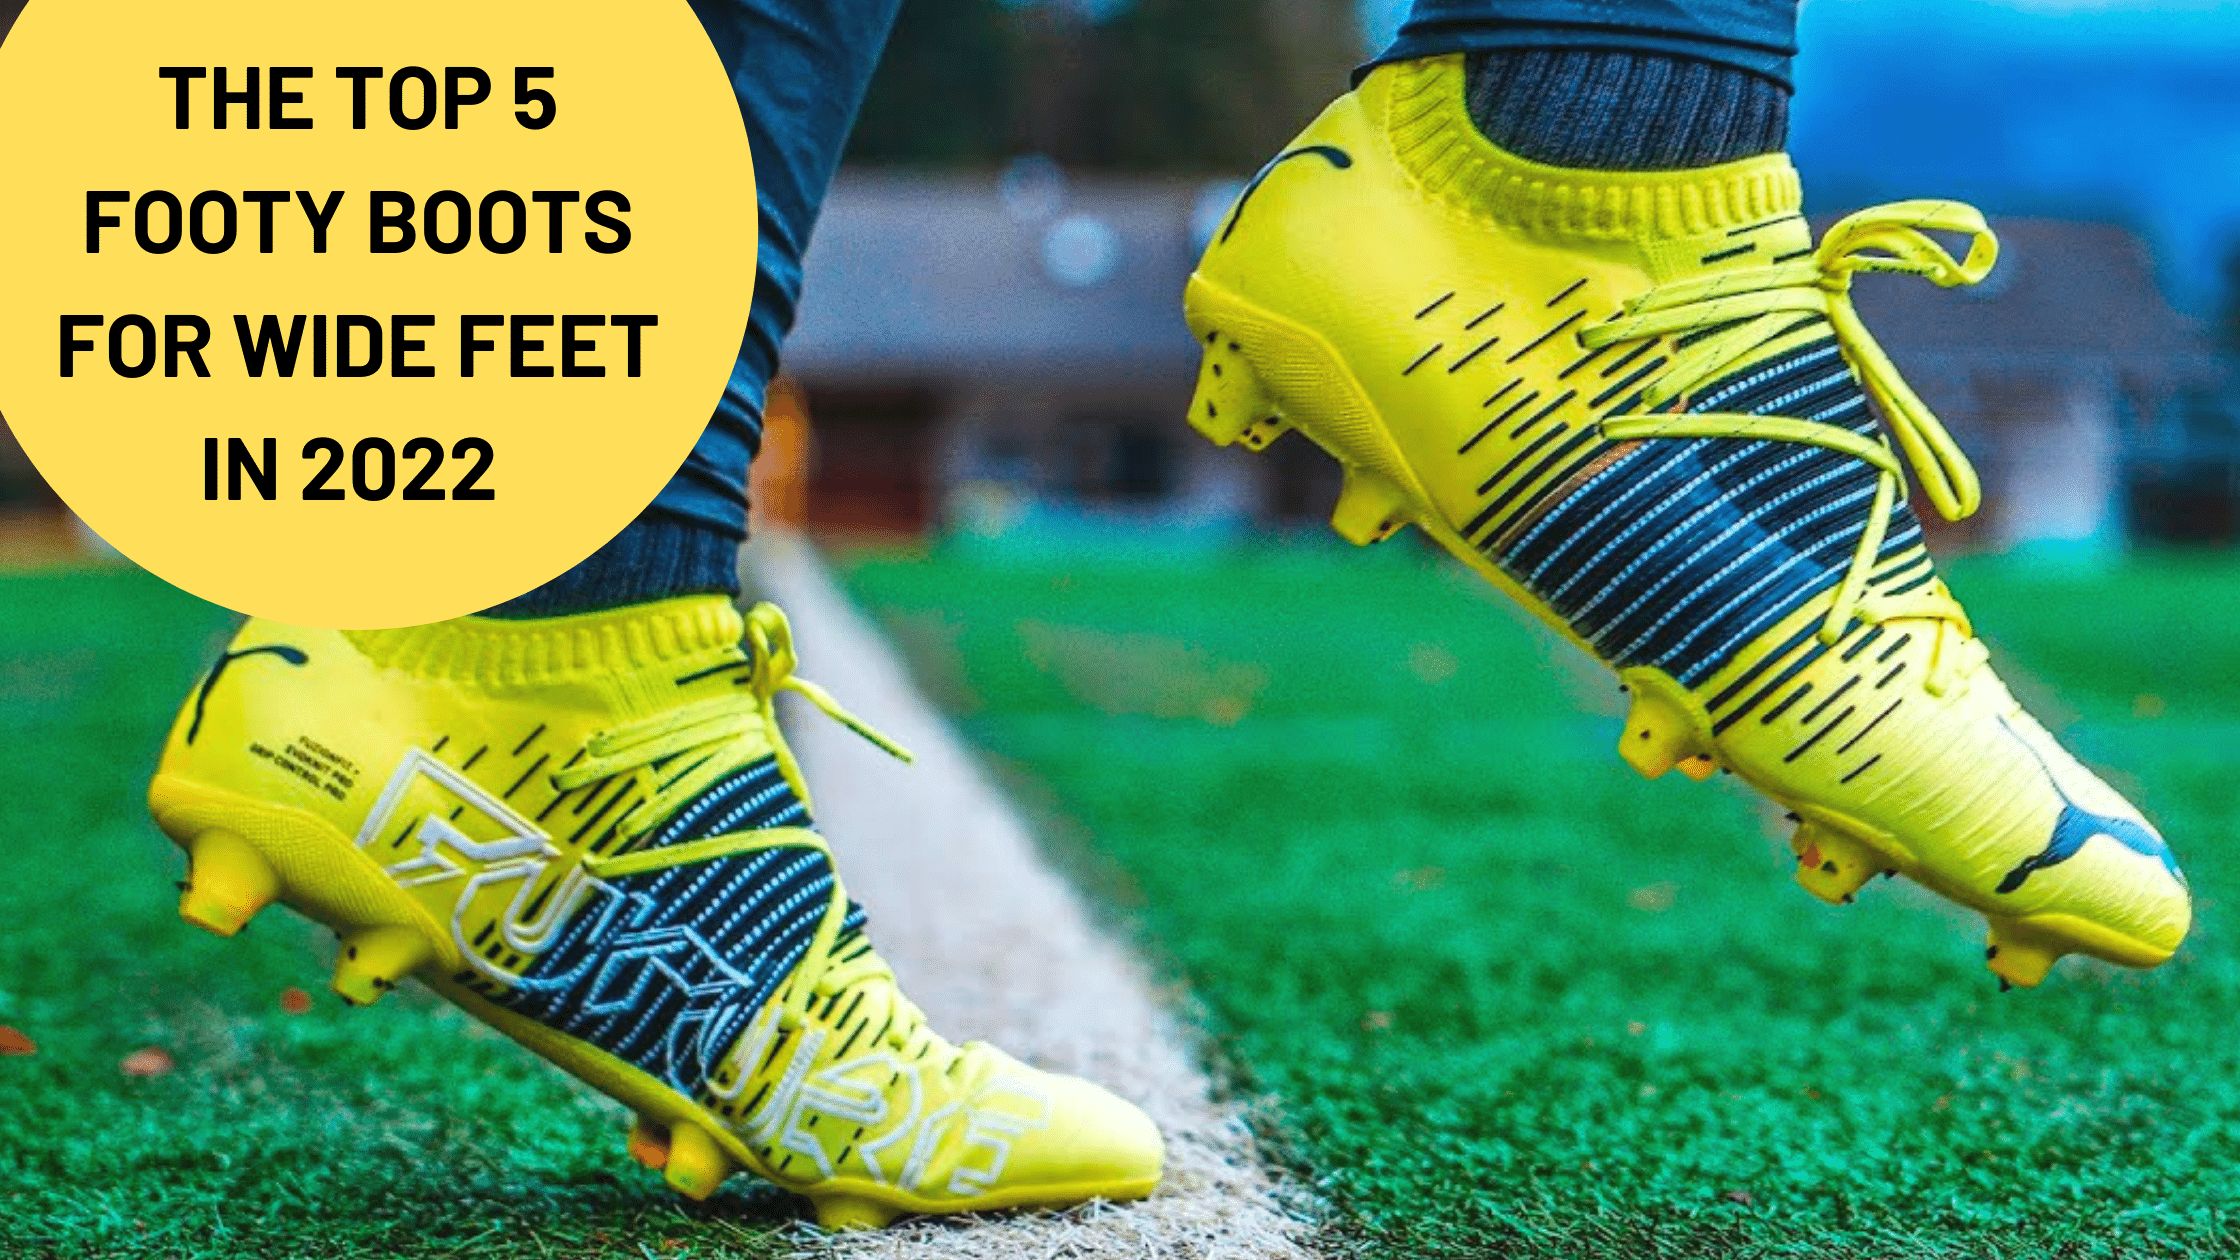 Best football boots and trainers for astroturf 2020